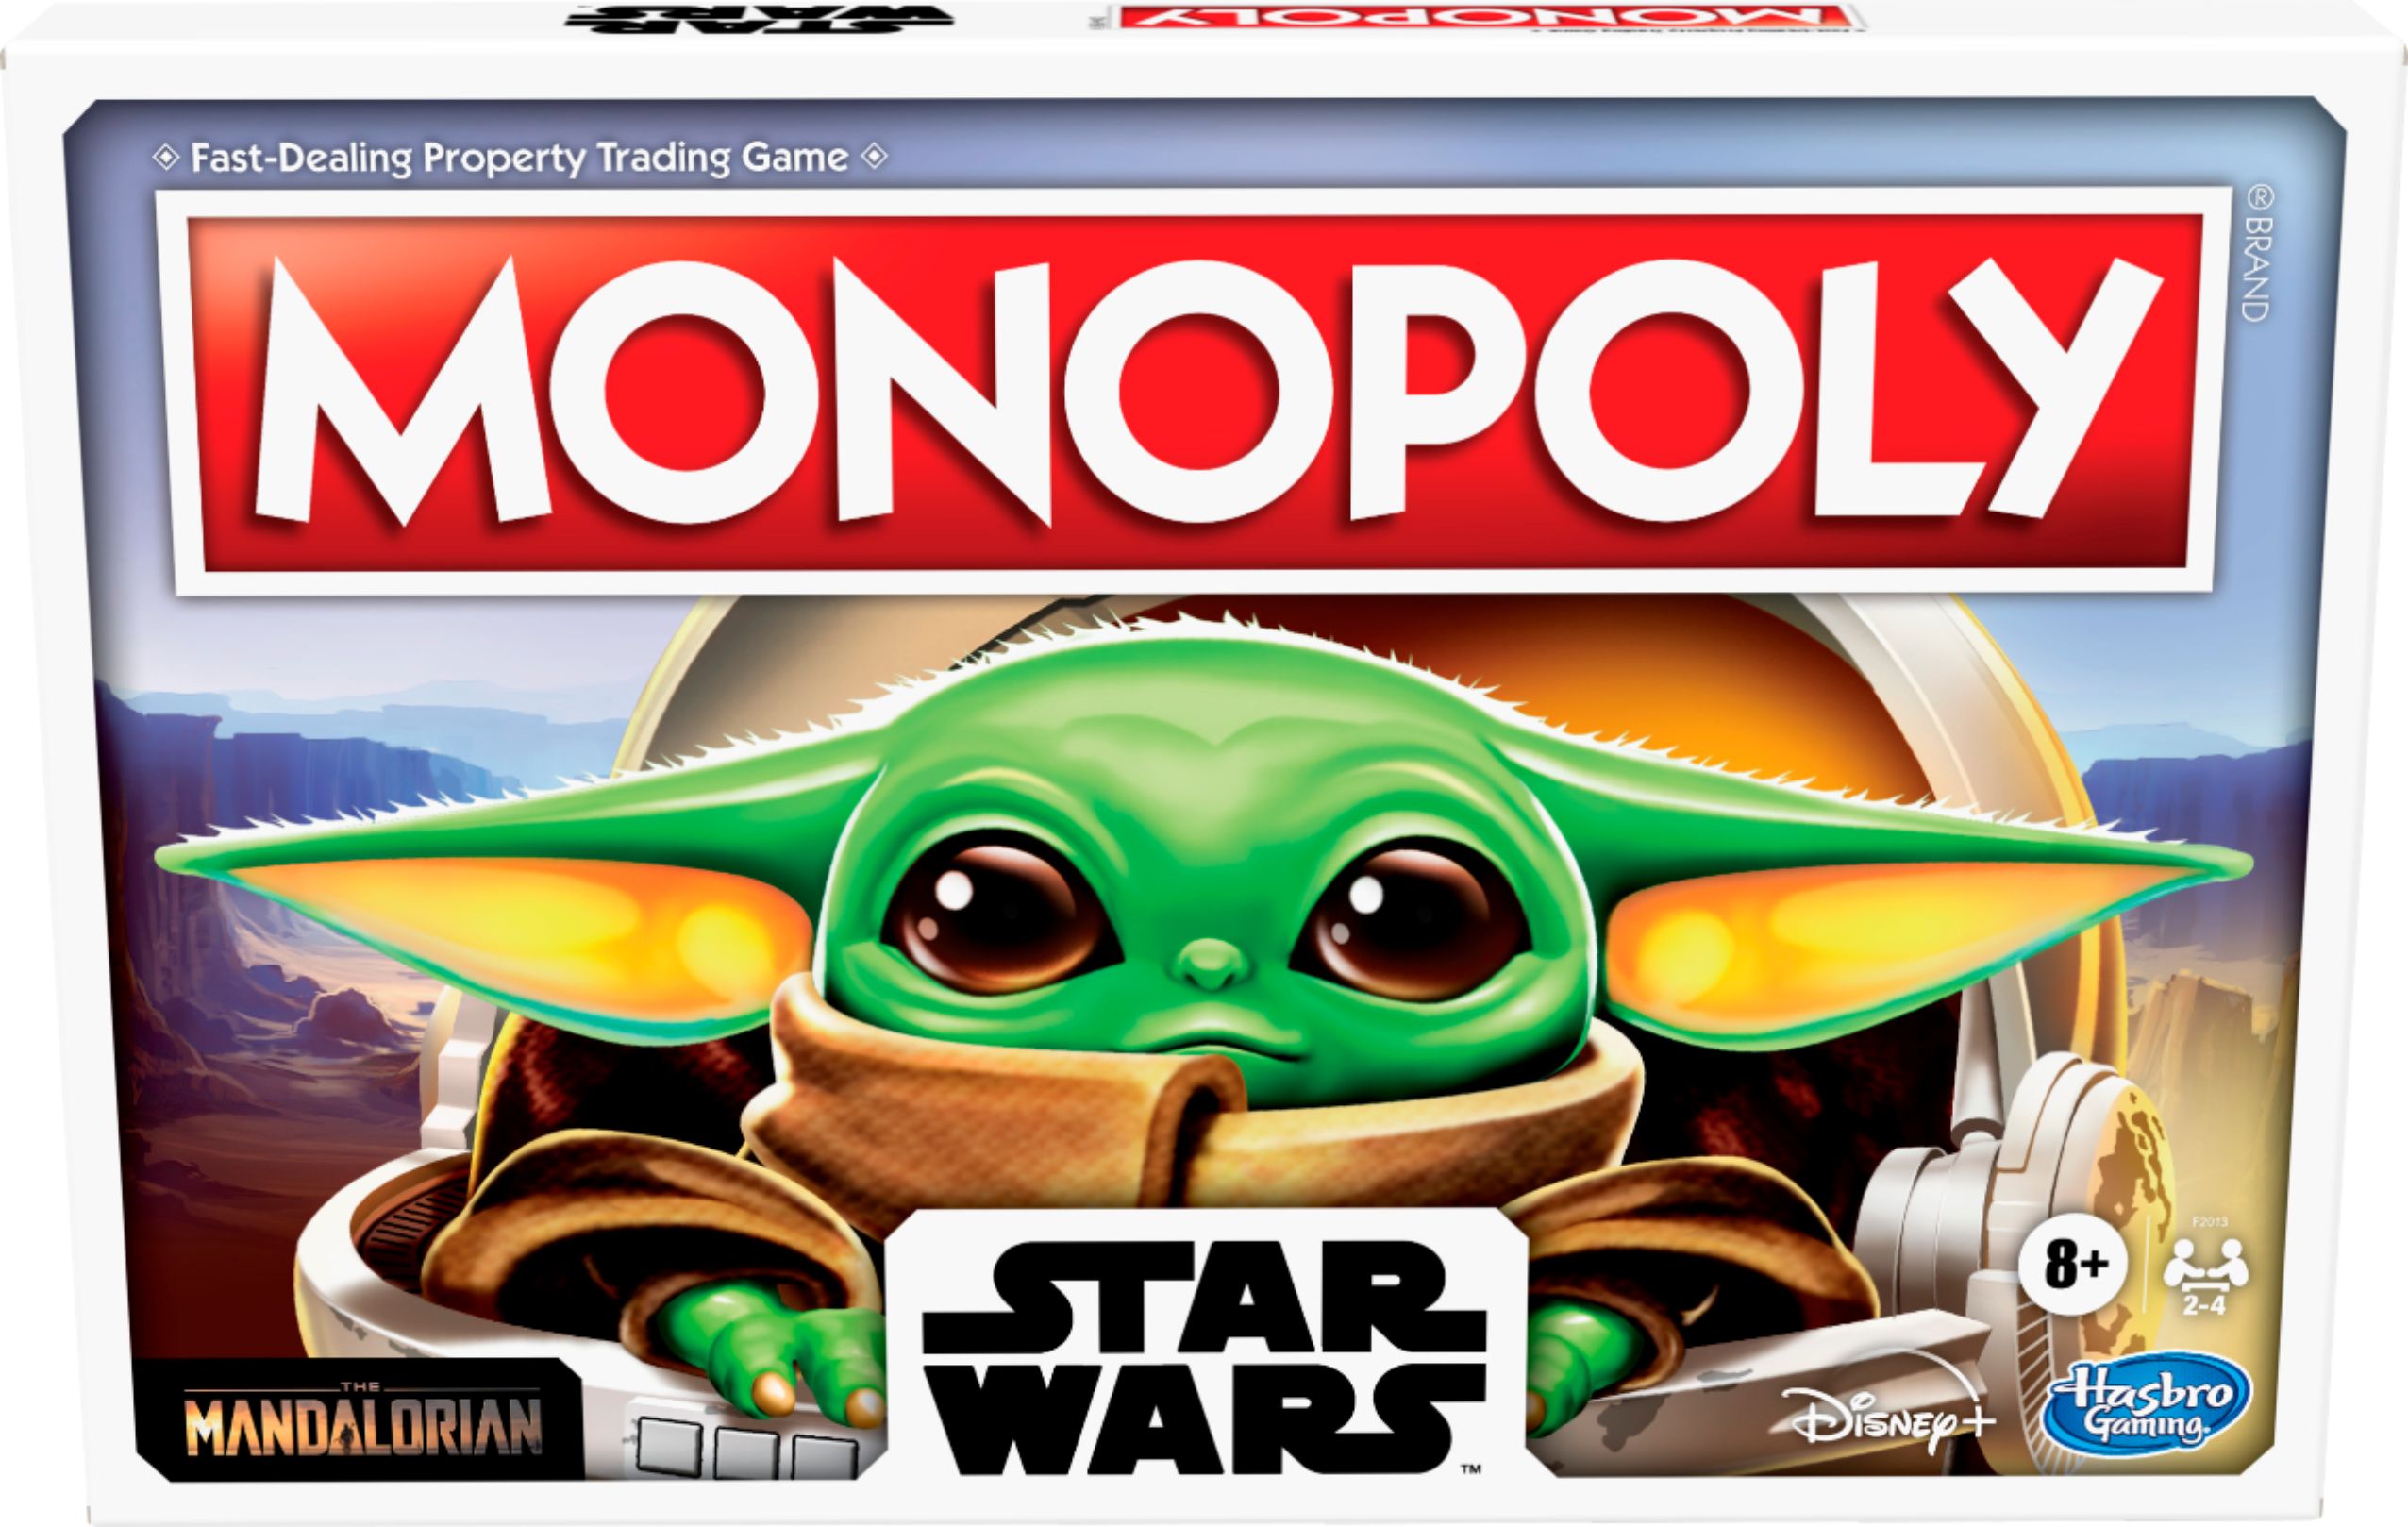 ITEM F2013 MONOPOLY Star Wars The Child Edition Board Game for Kids and Families for sale online 